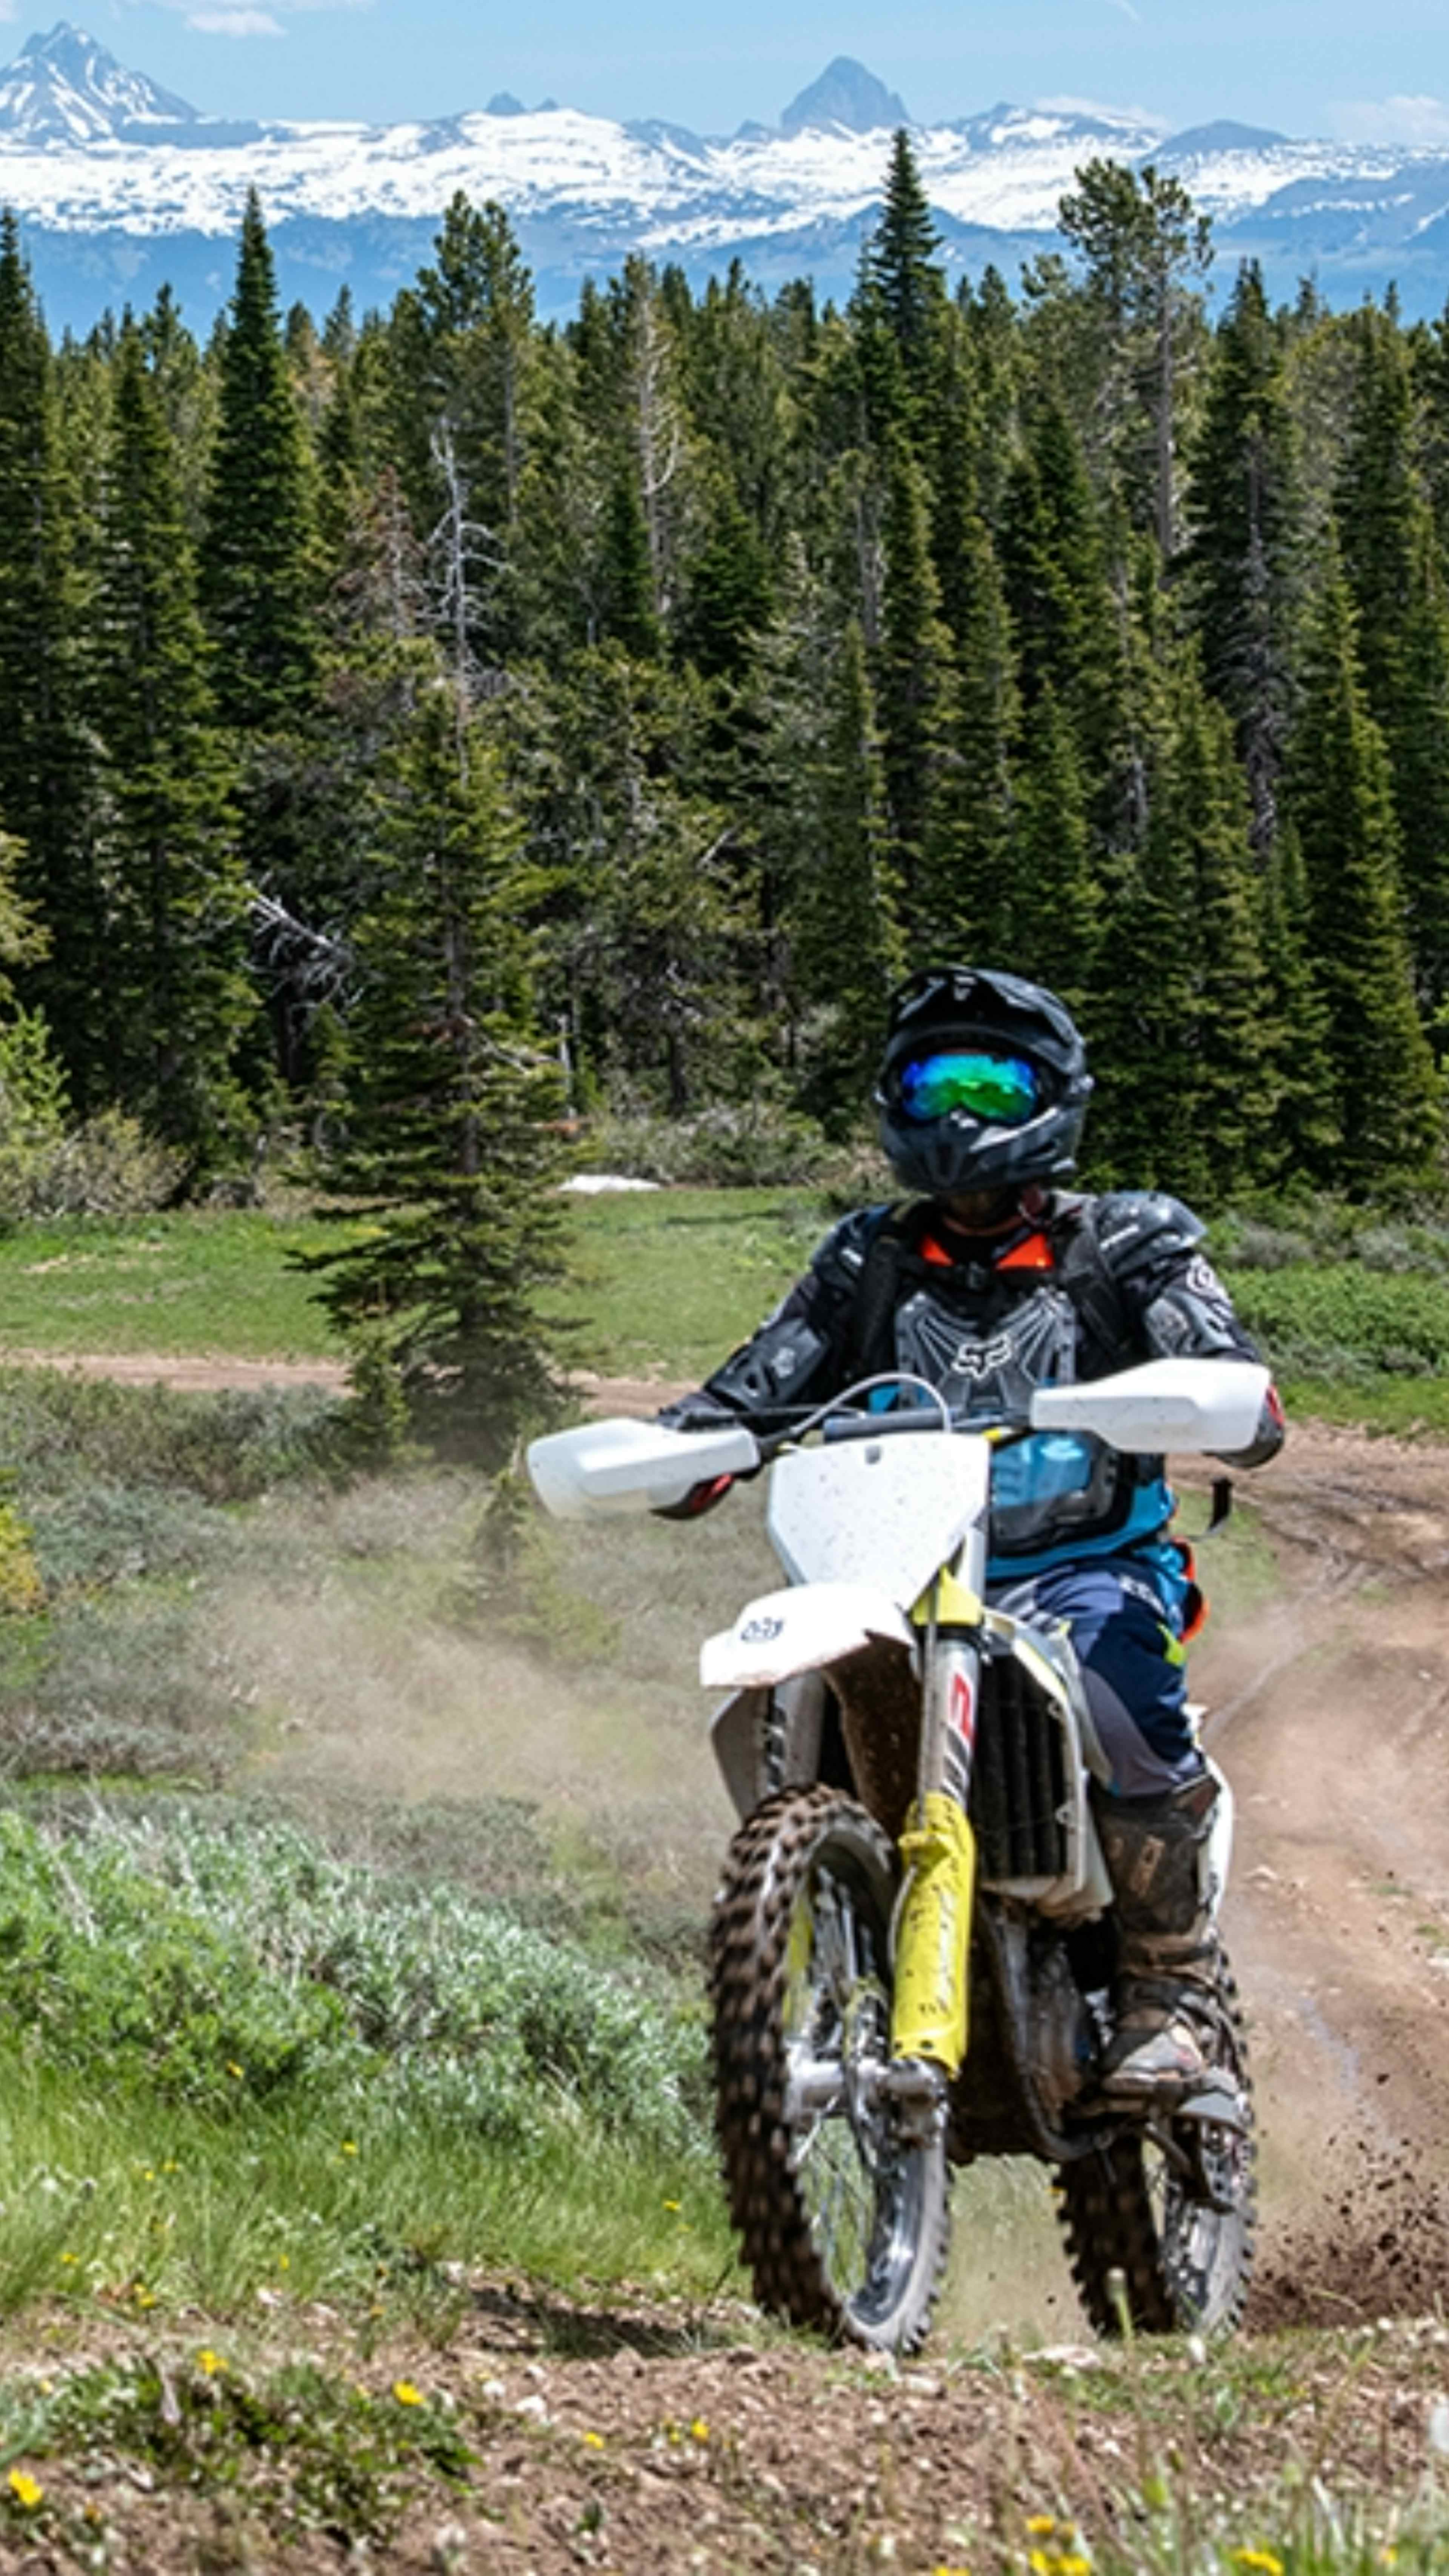 A dirt biker in the Big Holes in Teton Valley with a Teton Mountain Range as a backdrop.